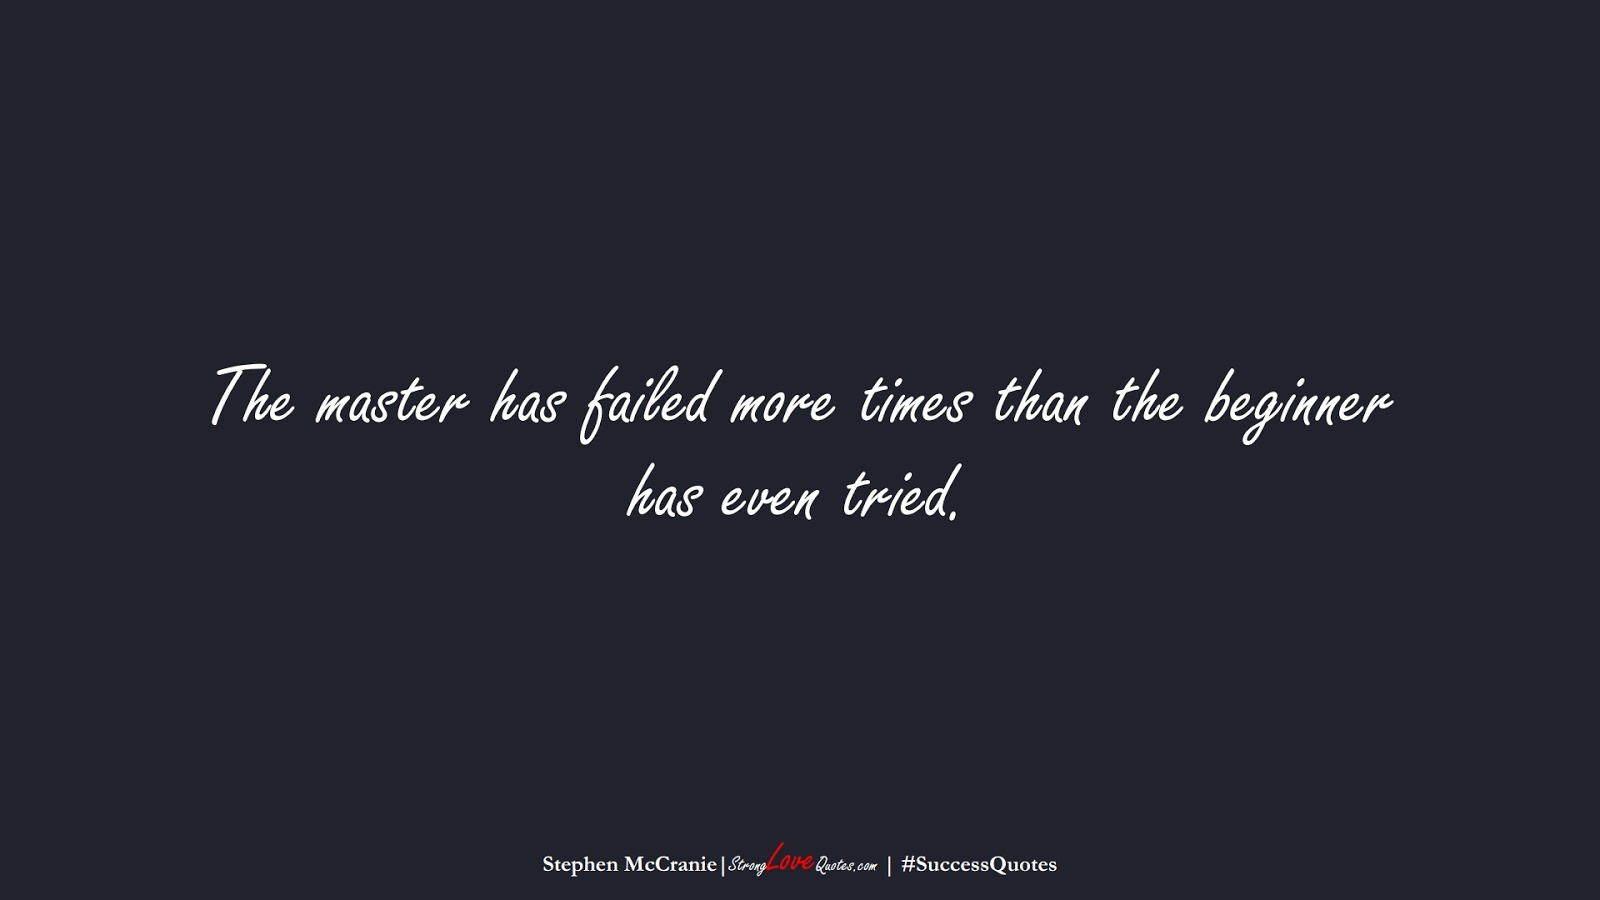 The master has failed more times than the beginner has even tried. (Stephen McCranie);  #SuccessQuotes